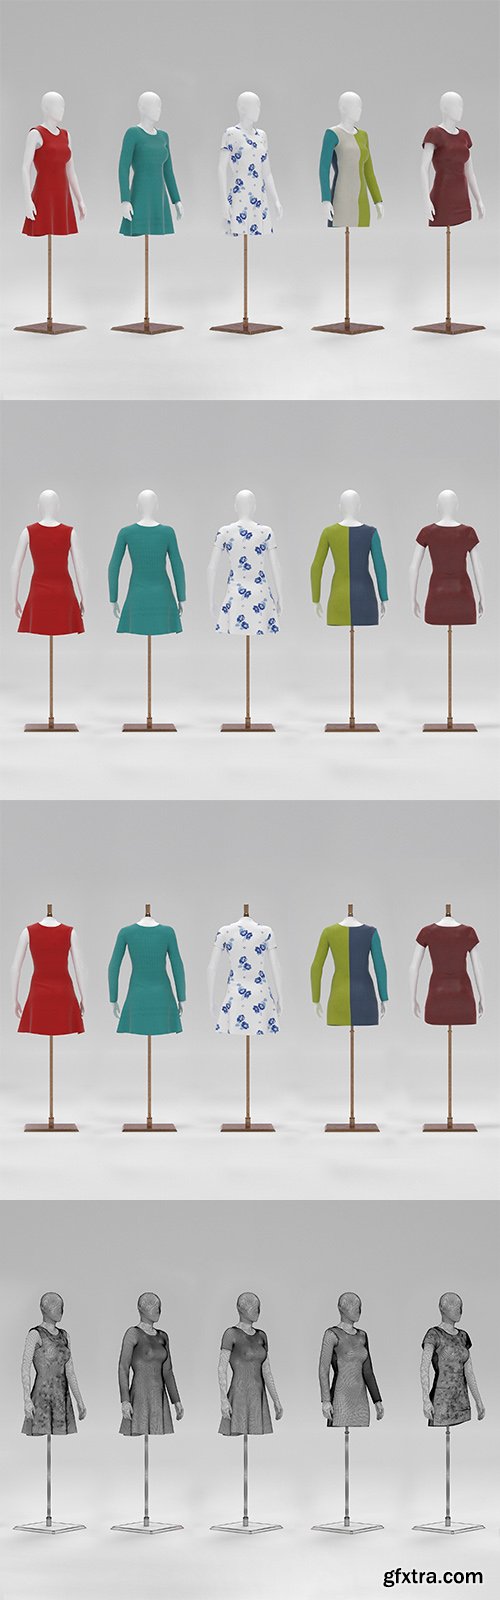 Cgtrader - Women Mannequin Pack Low-poly 3D model